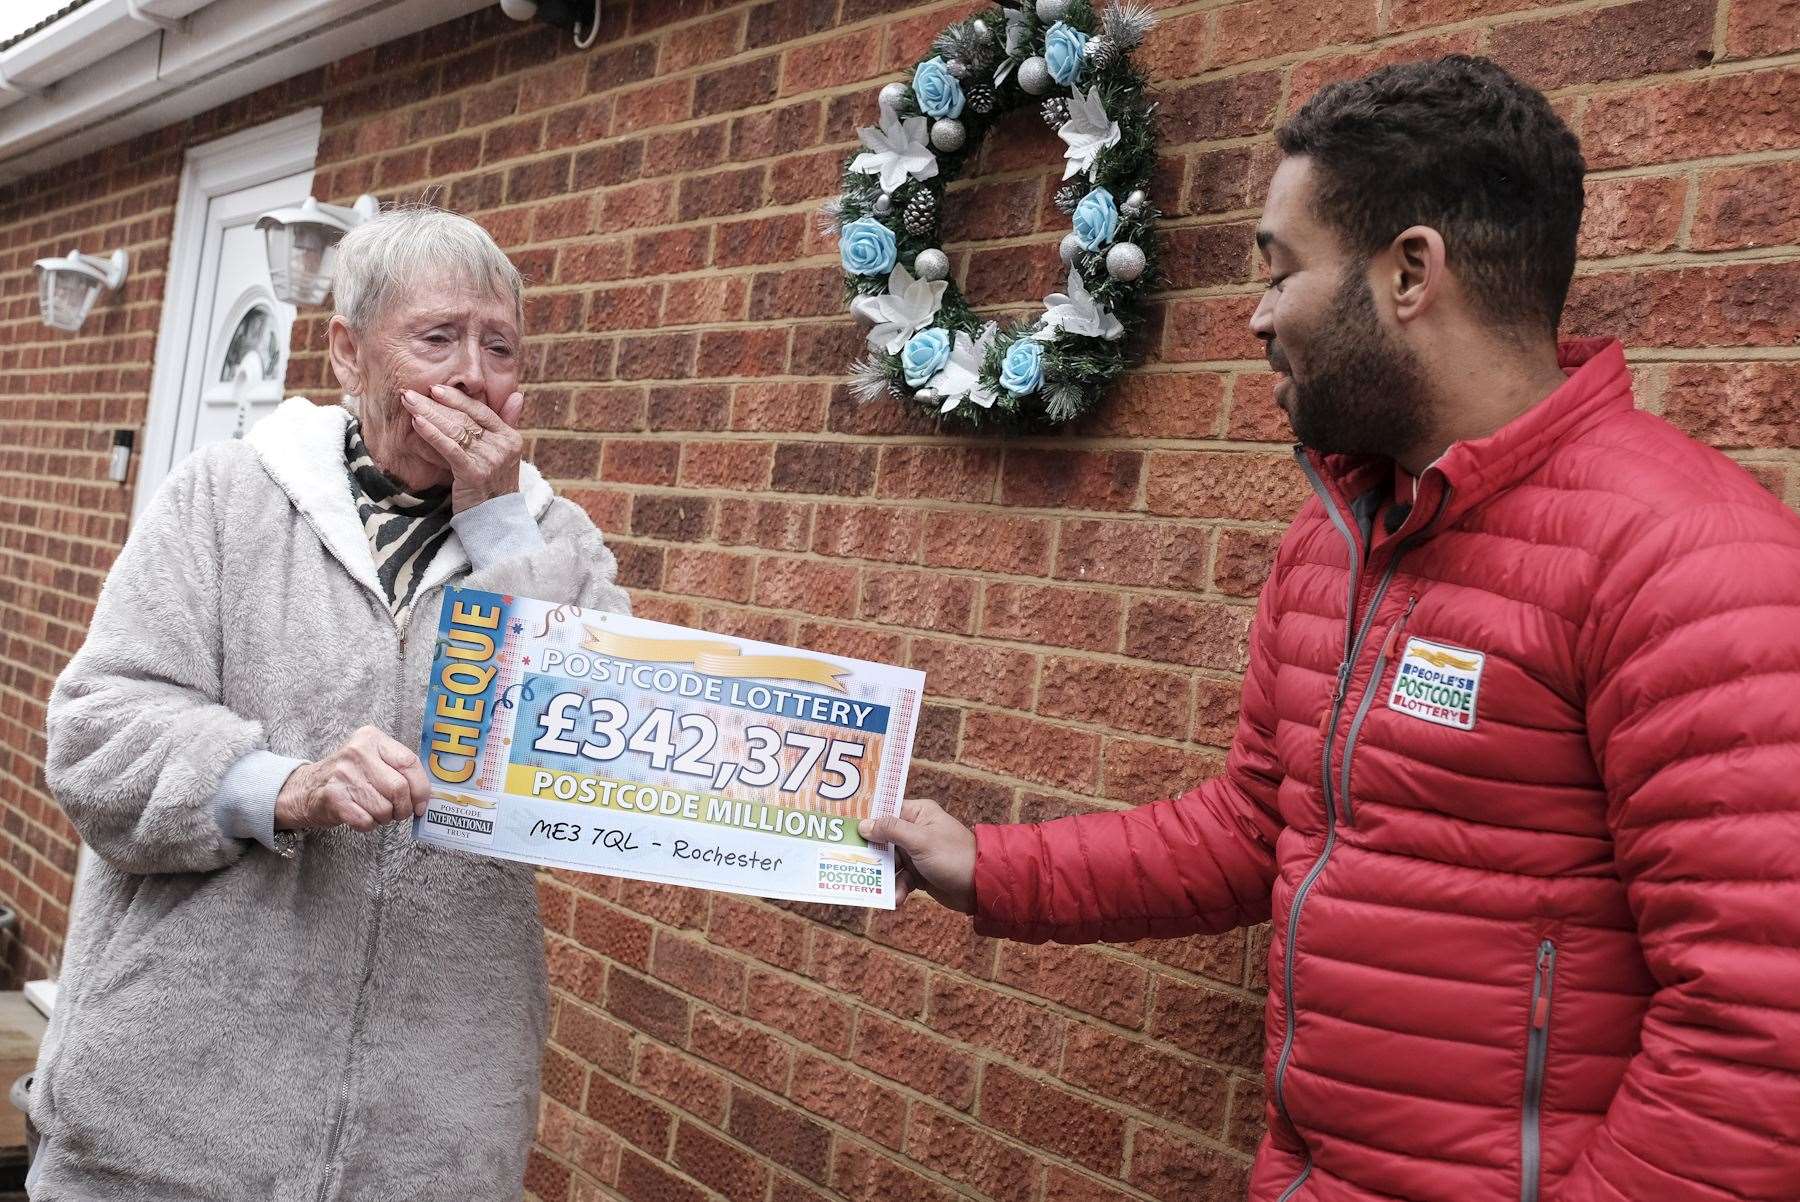 Betty Reilly is a winner in the People's Postcode Lottery in ME3 7QL. Picture: People's Postcode Lottery